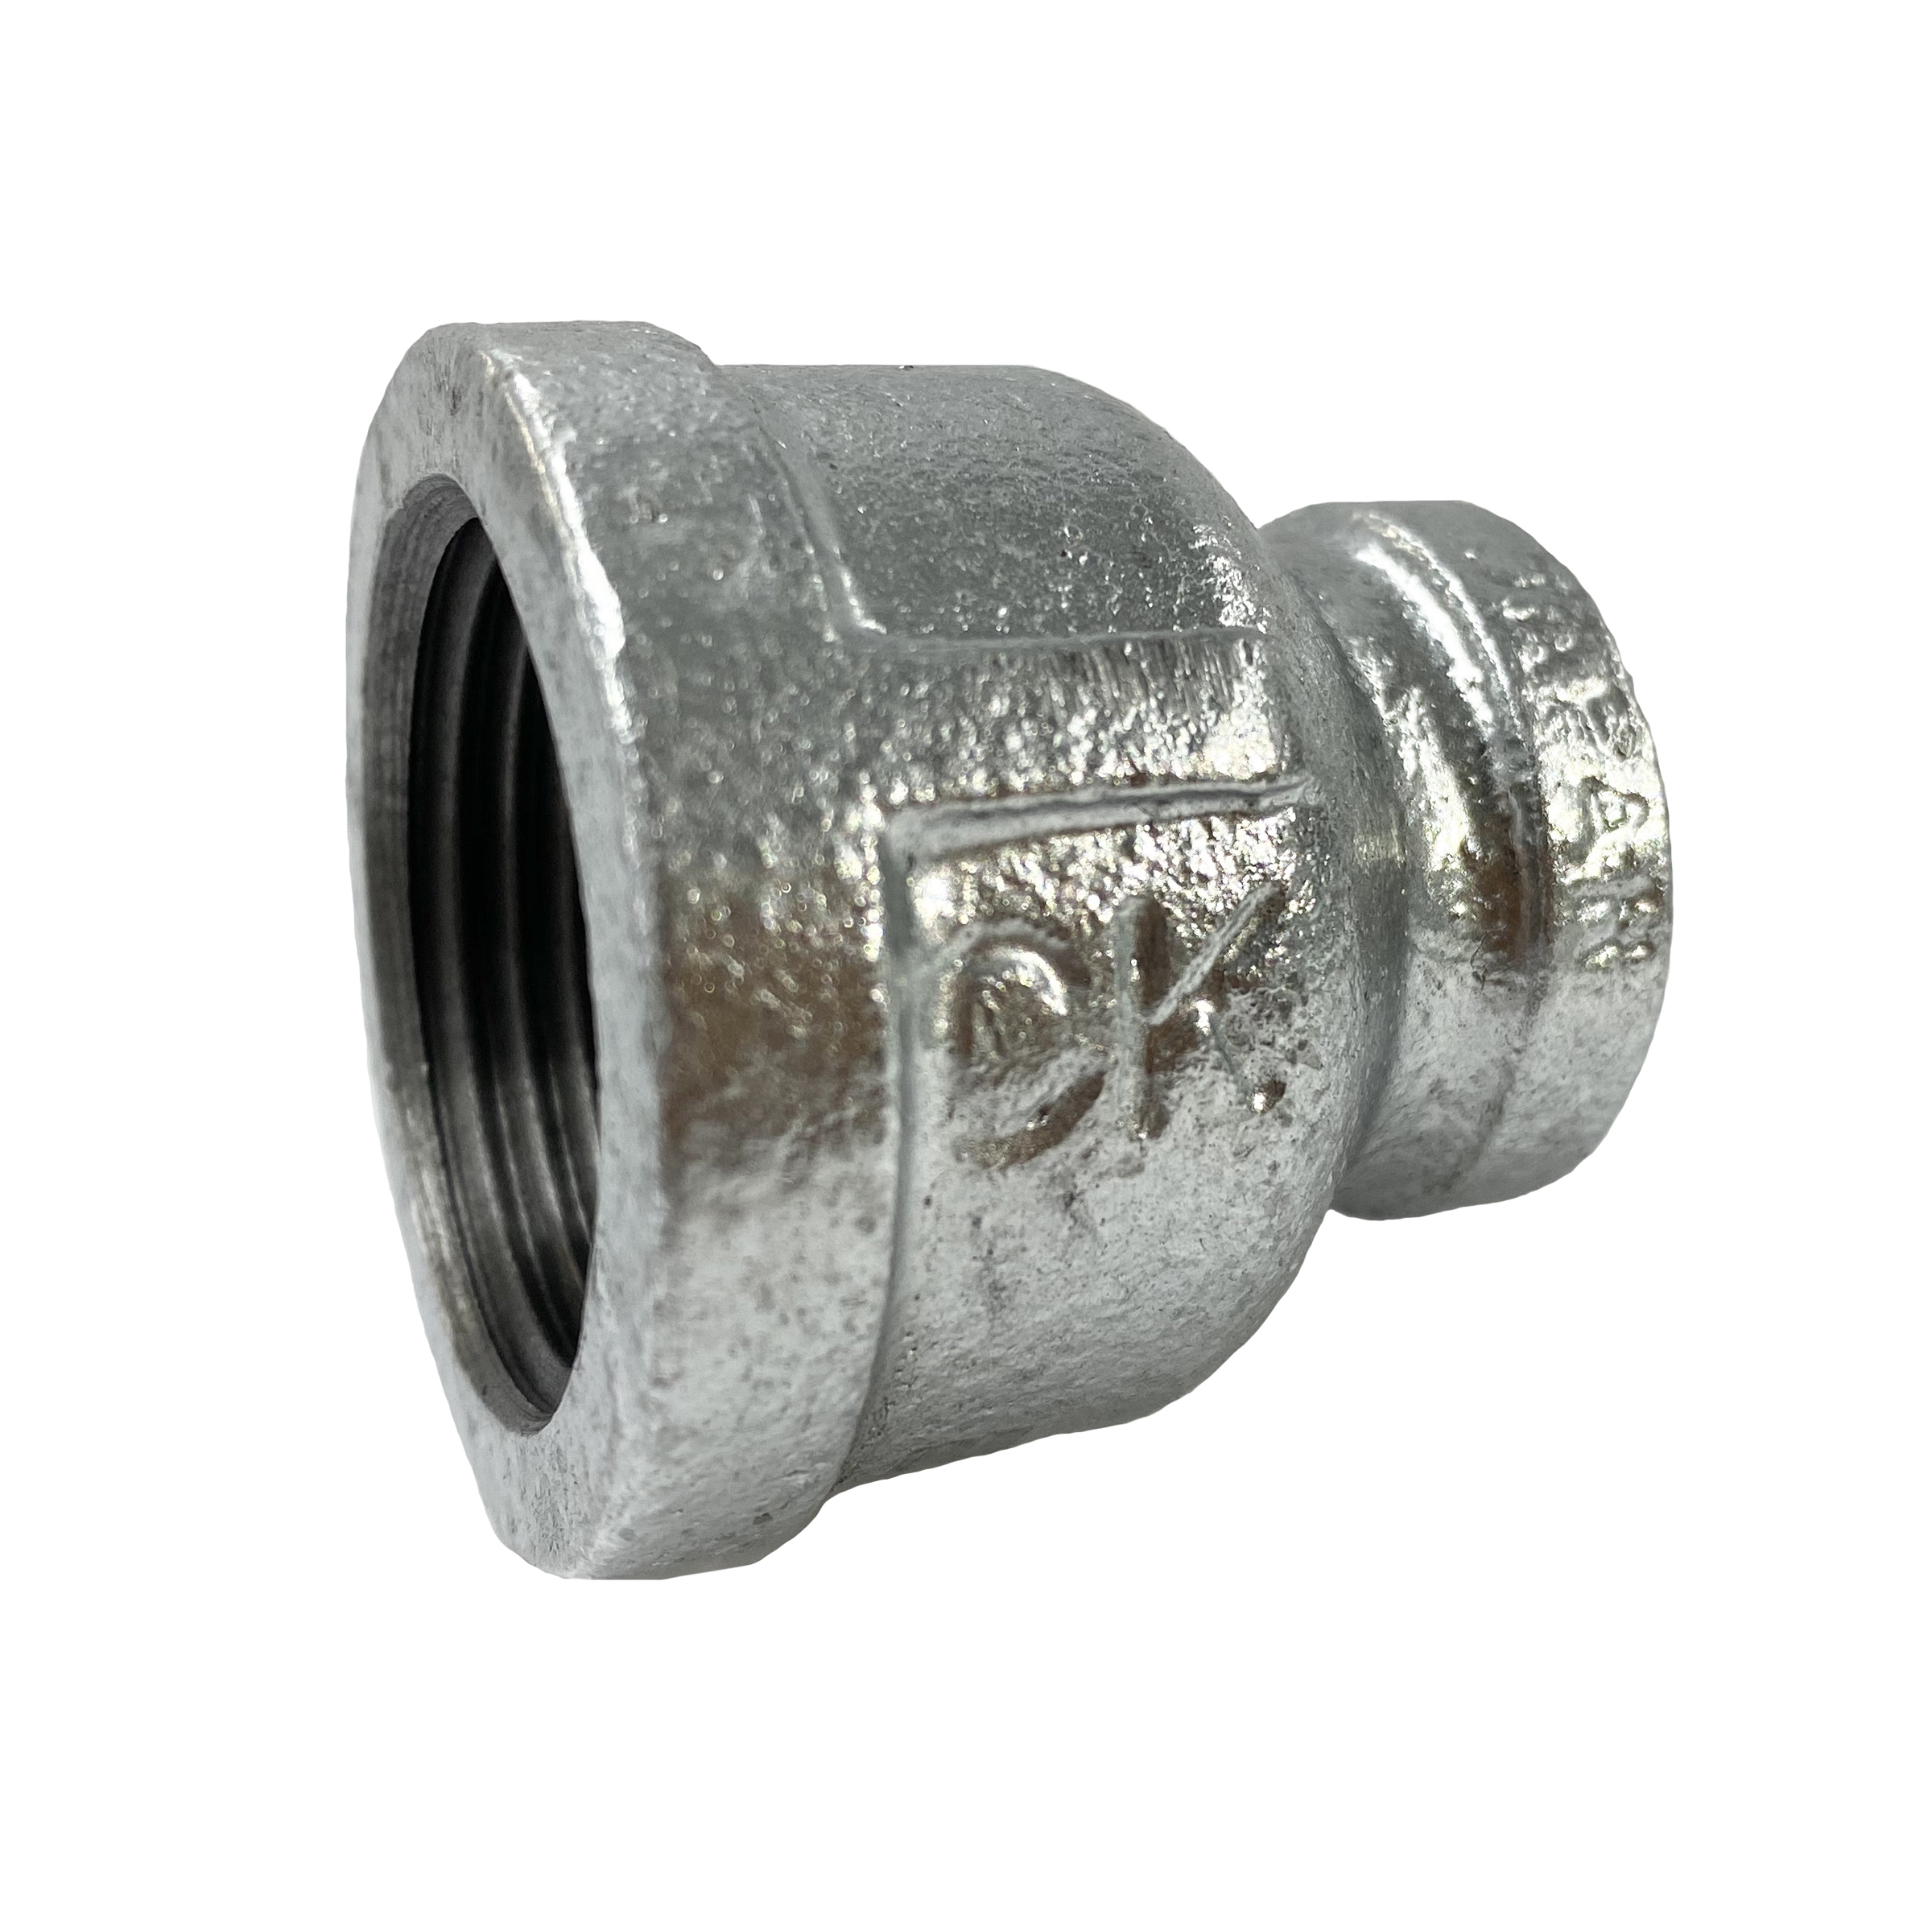 CK Fittings - Screw-in Type Malleable Cast Iron Pipe Fitting - Socket with Different Diameters with Band BRS-40X32-W